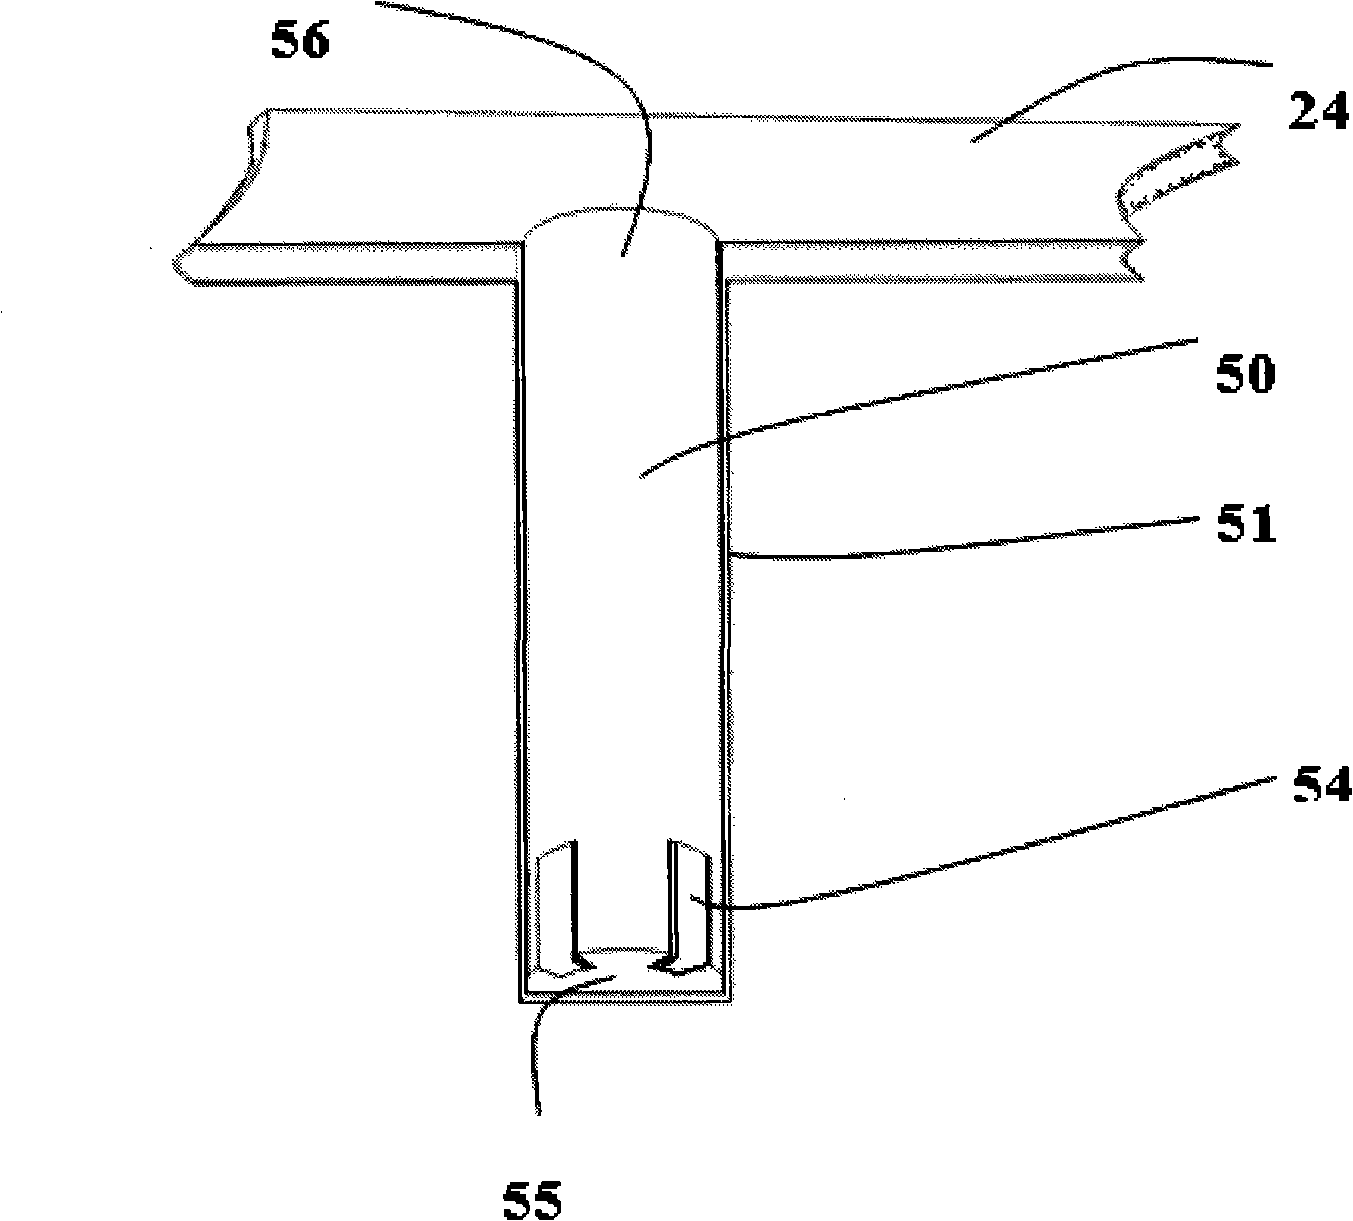 Apparatus and method for cultivation and process of cell or tissue